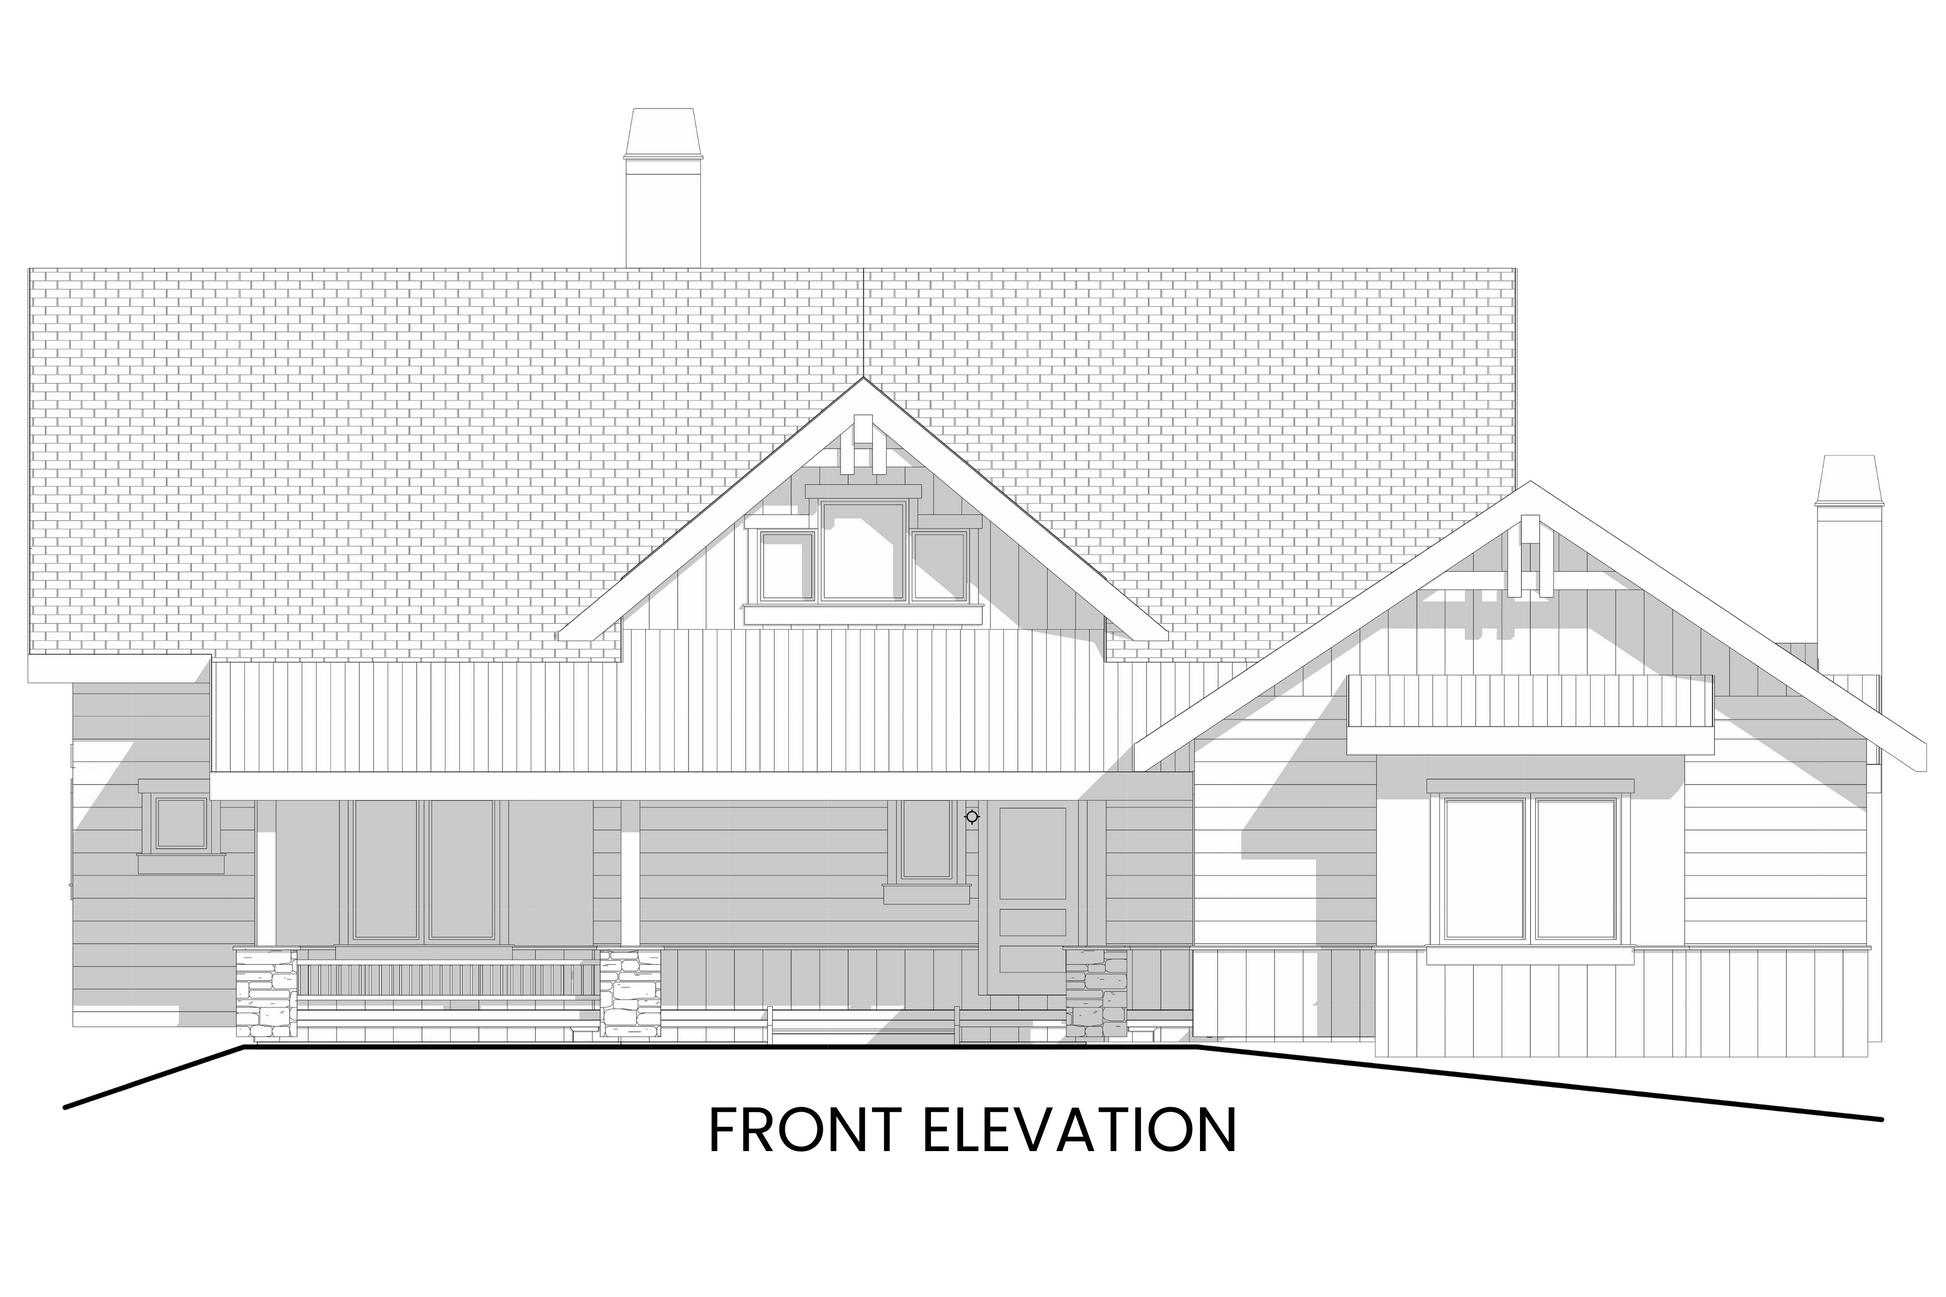 Cabin-Plan-with-Front-Porch-for-Sites-with-a-Rear-View-Front-Elevation-Rocky-Mountain-Plan-Company-Lake-Agnes